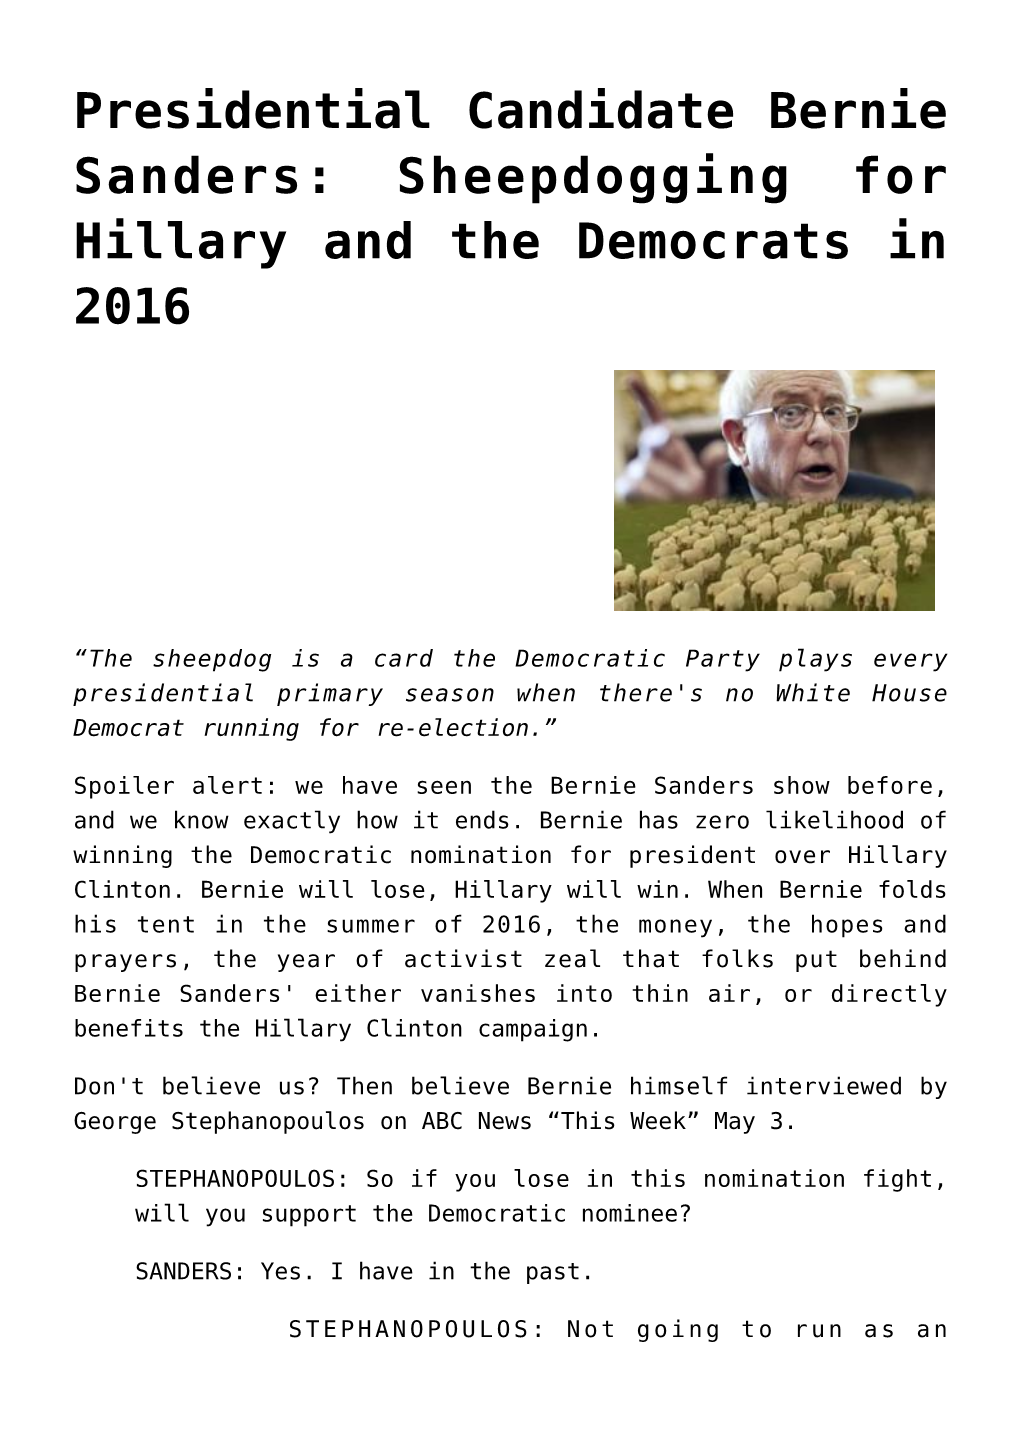 Presidential Candidate Bernie Sanders: Sheepdogging for Hillary and the Democrats in 2016